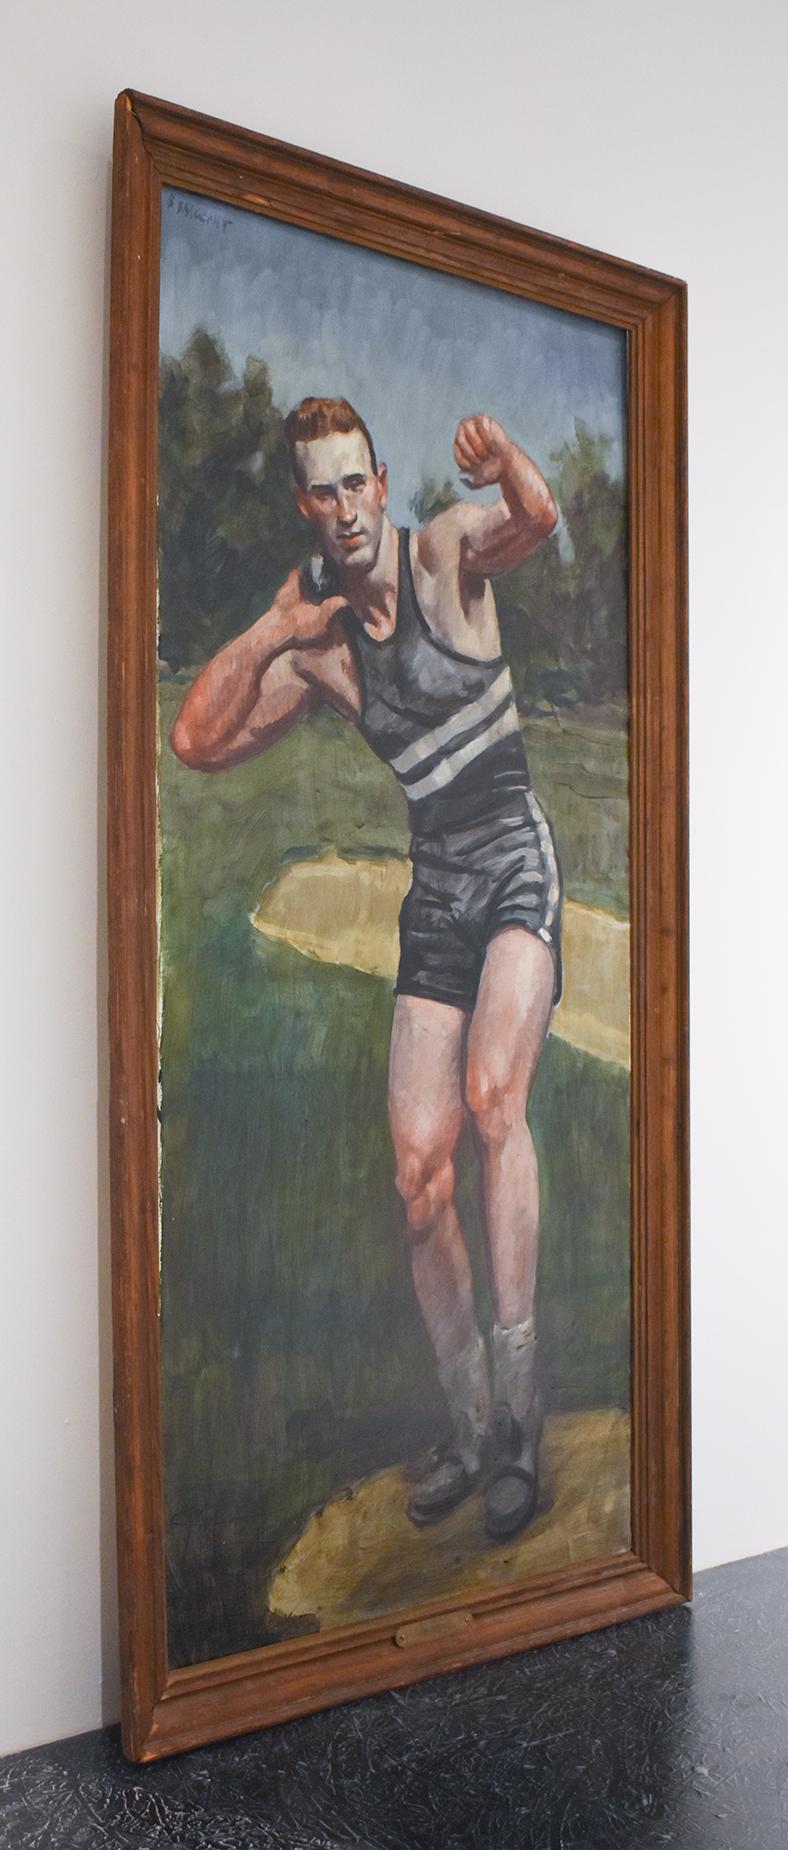 Vertical figurative oil painting of male shot put athlete
48 x 24 inches, 52 x 27 x 2 inches in distressed wood frame
Signed, verso & front (Mark Beard, aka. Bruce Sargeant)

This vertical, contemporary figurative painting of a young male athlete